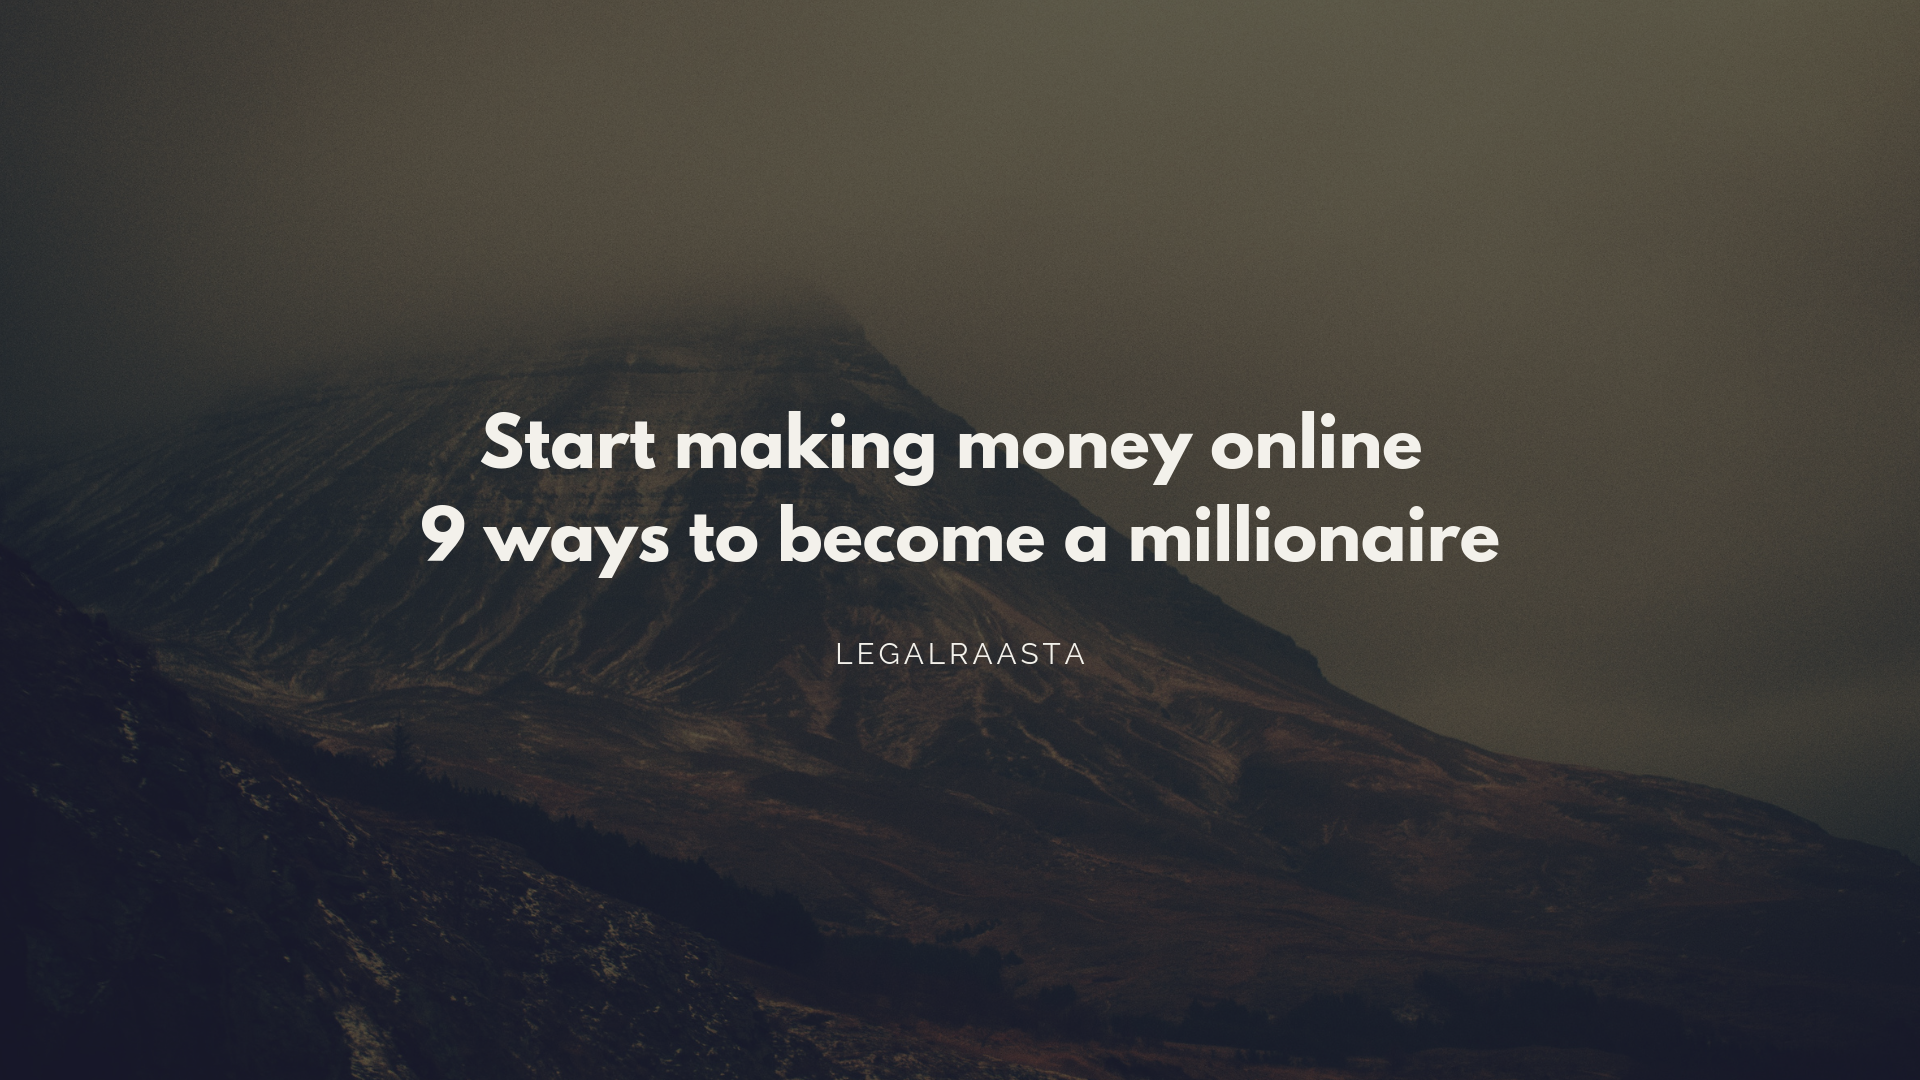 Start making money online- 9 ways to become a millionaire 